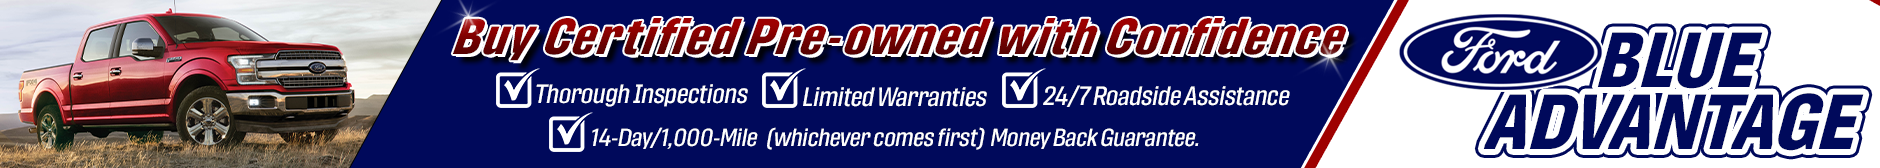 Blue certified preowned